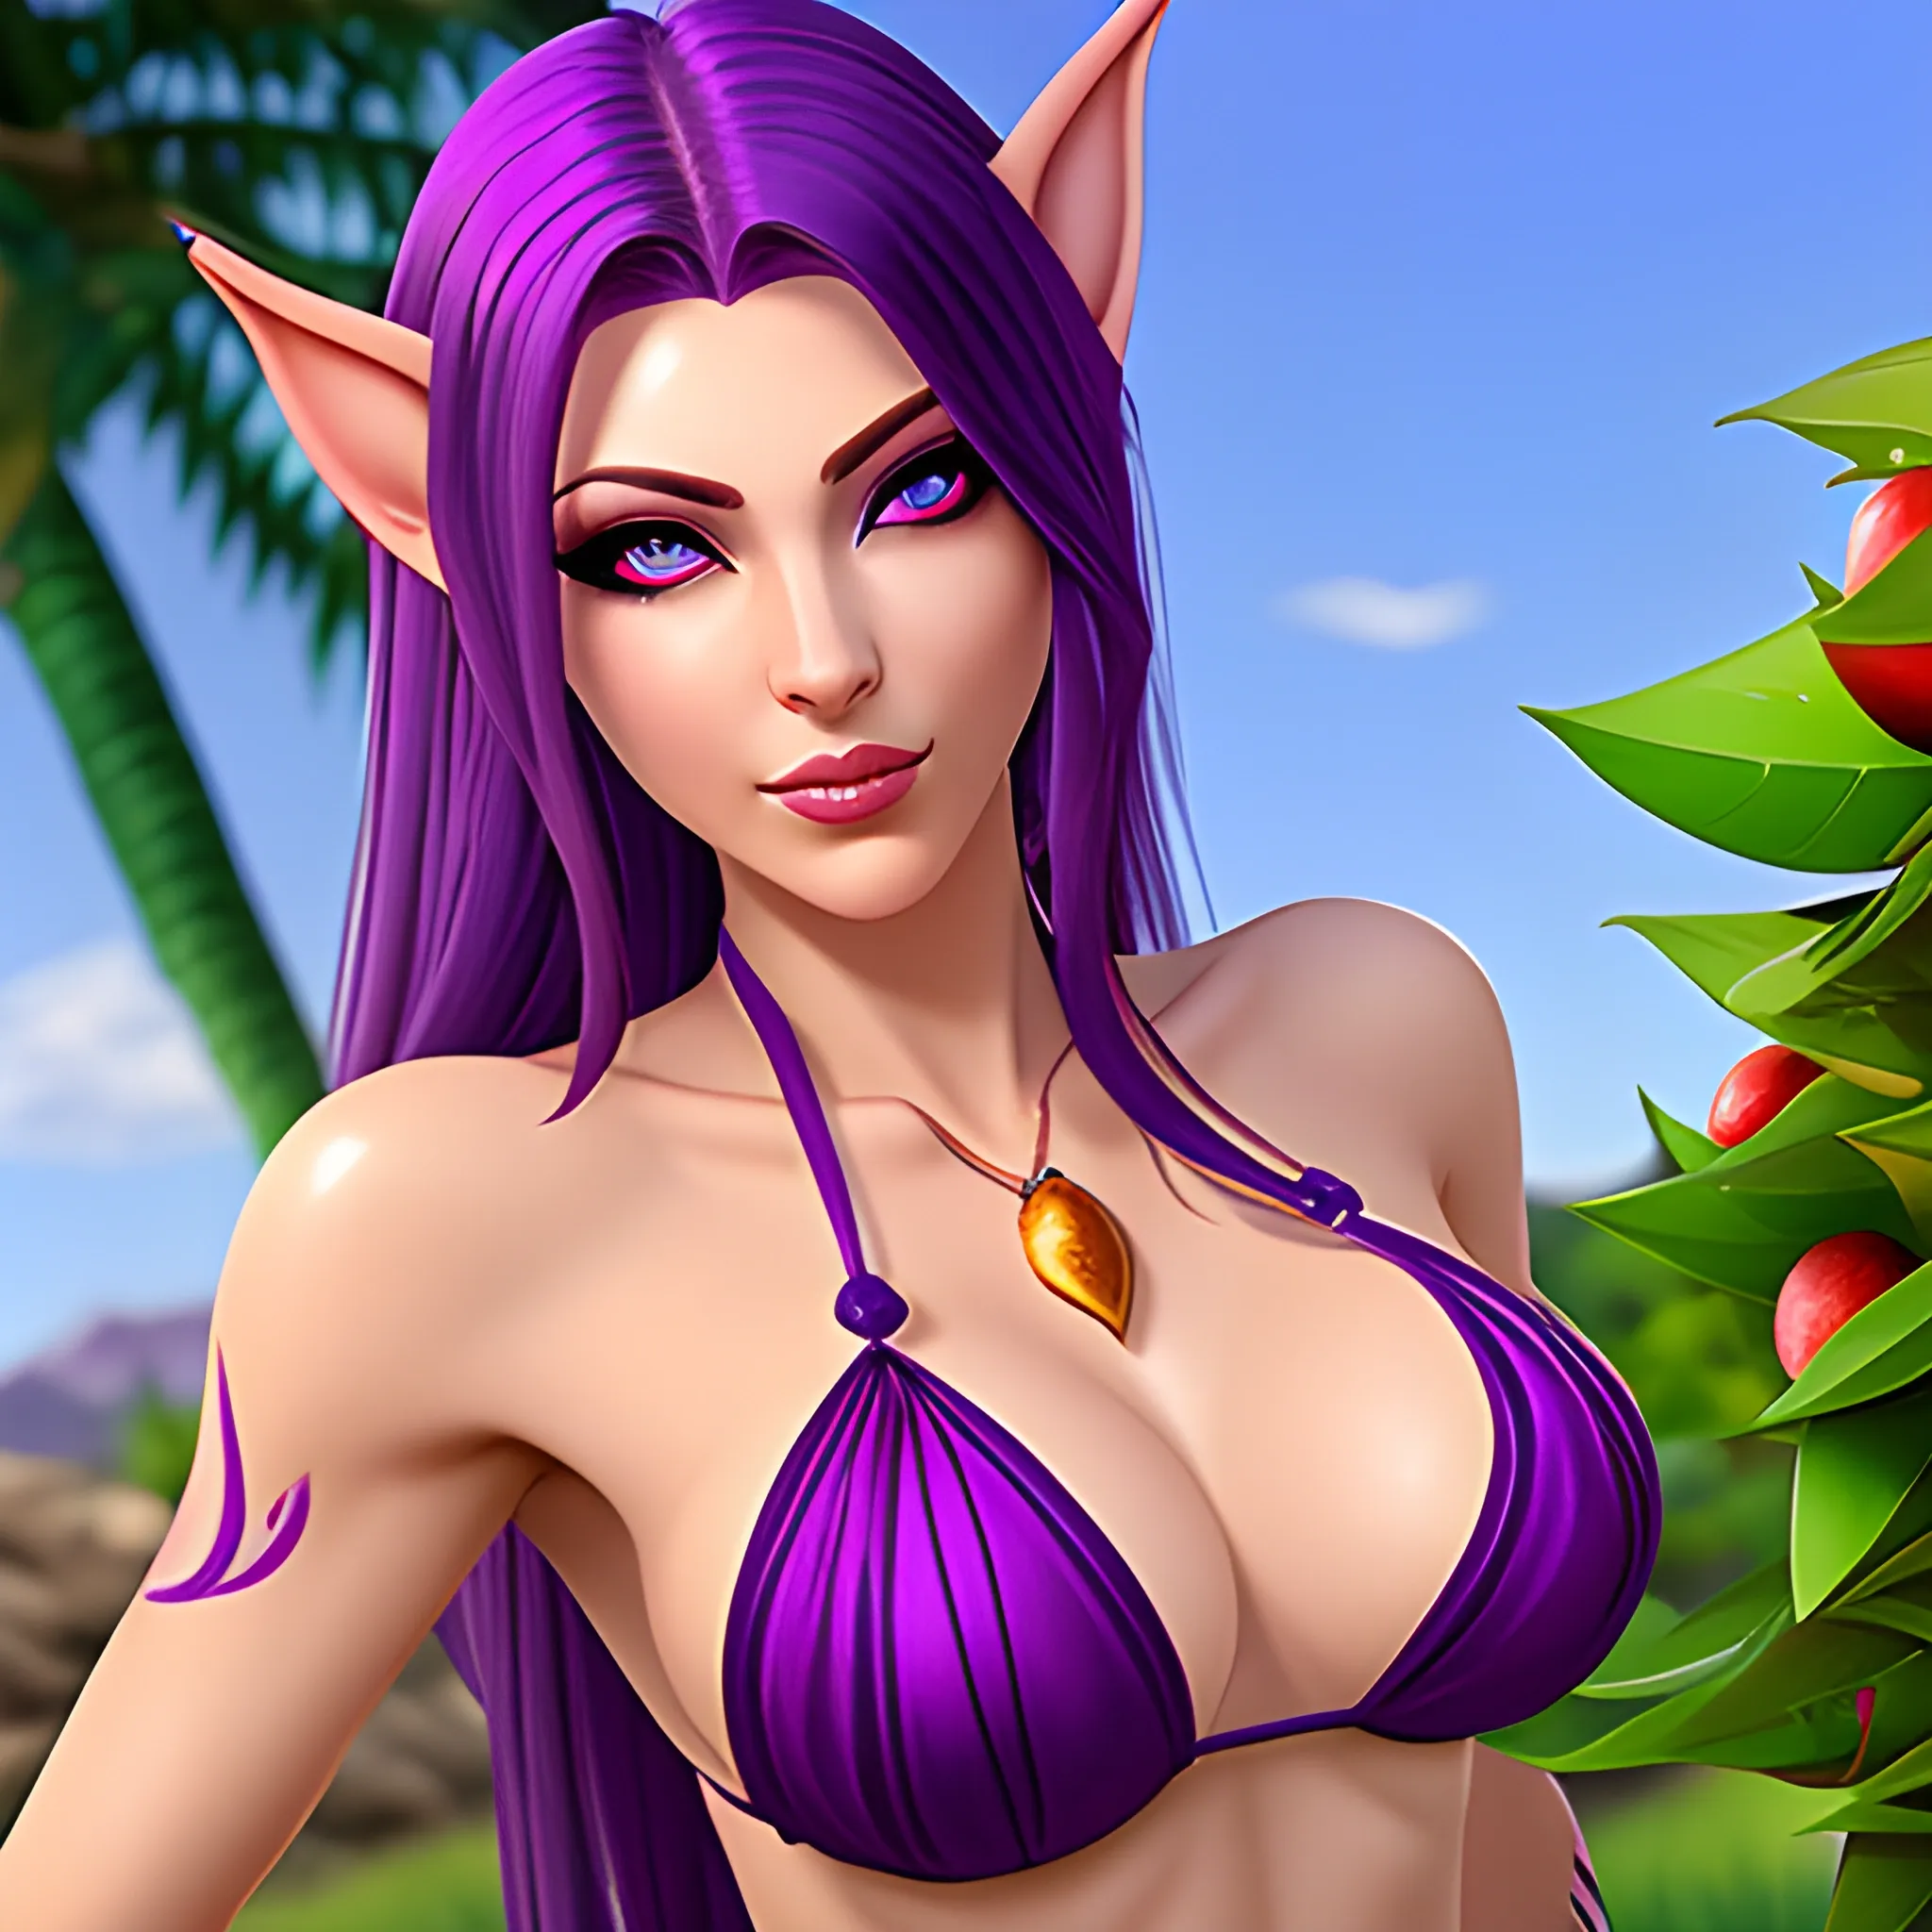 Beautiful blood elf with purple hair and purple eyes in a bikini picking up a fruit
